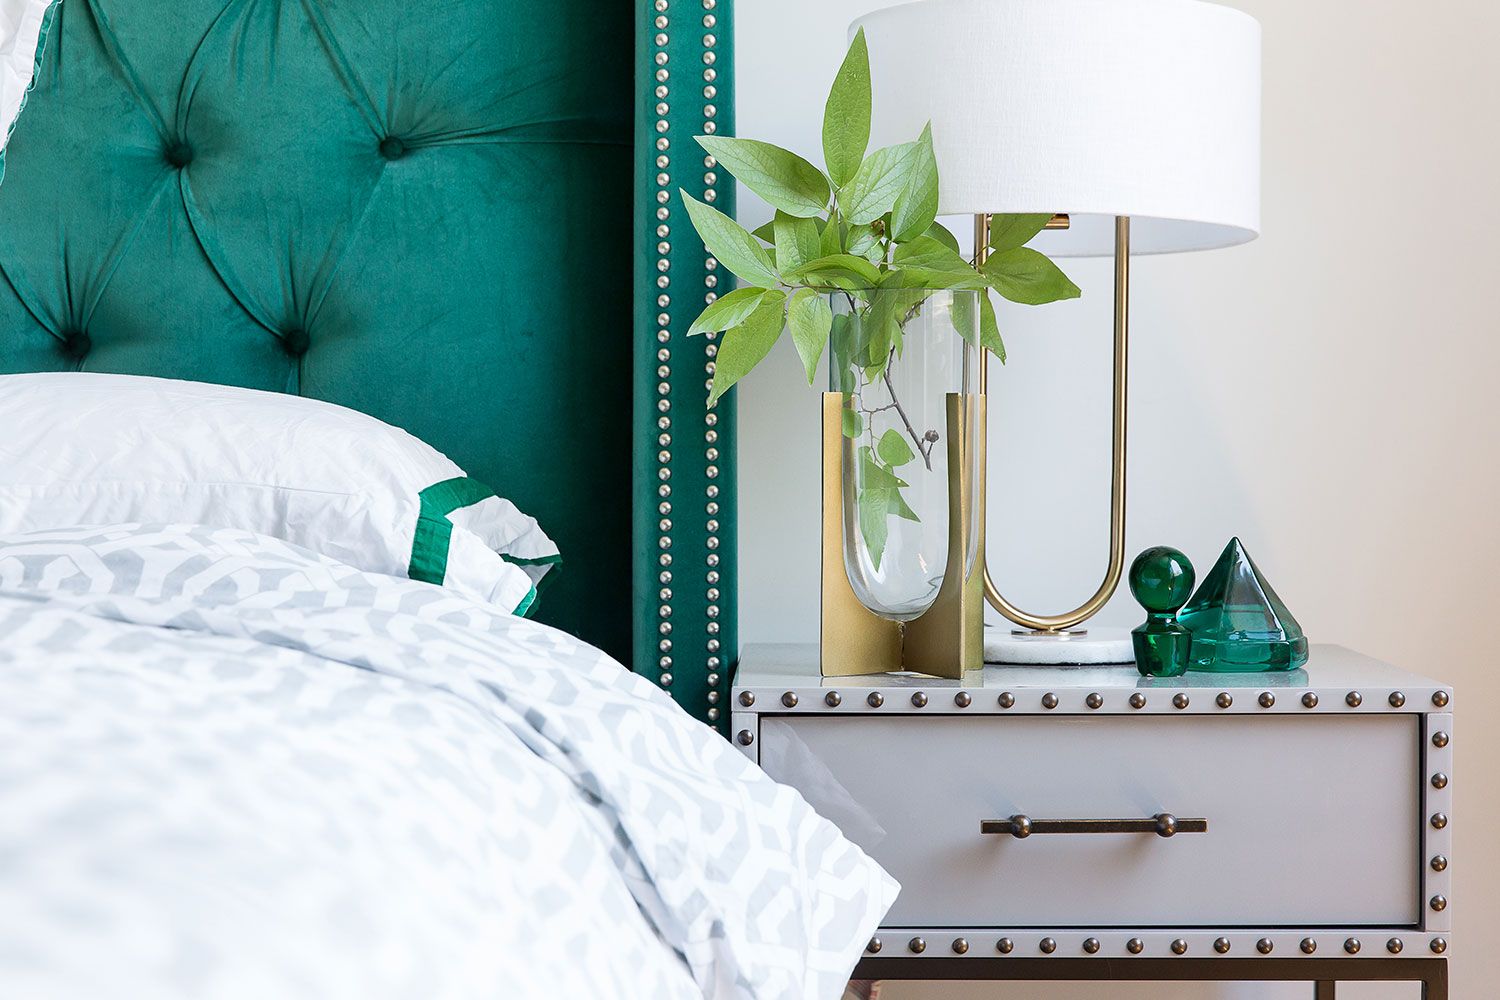 Furniture and accessories for your green bedroom